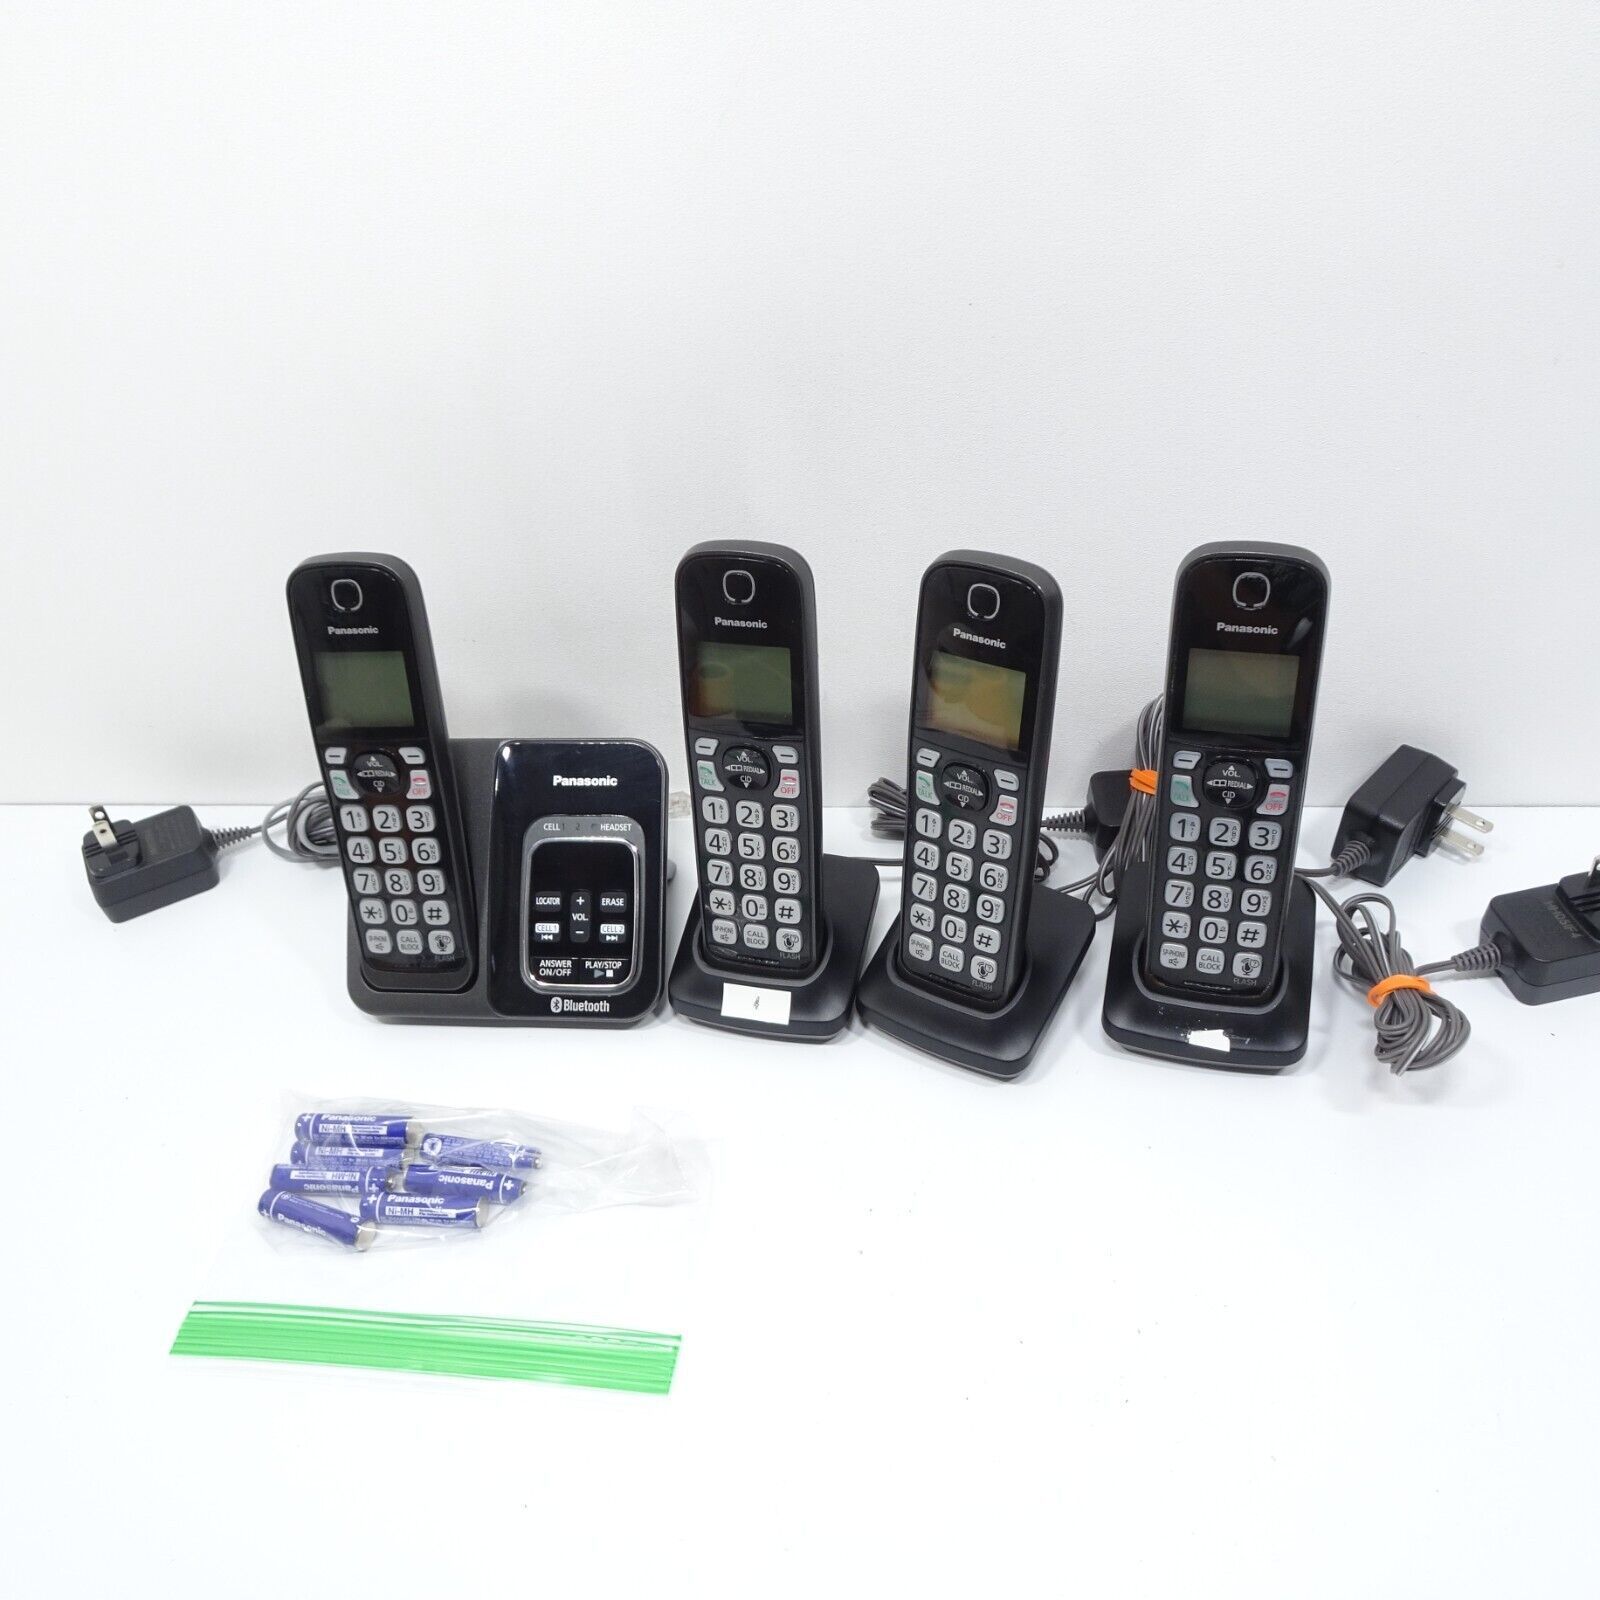 Panasonic KX-TGD560 Link2Cell Bluetooth Cordless Phone System w/4 Handsets Base - $35.99